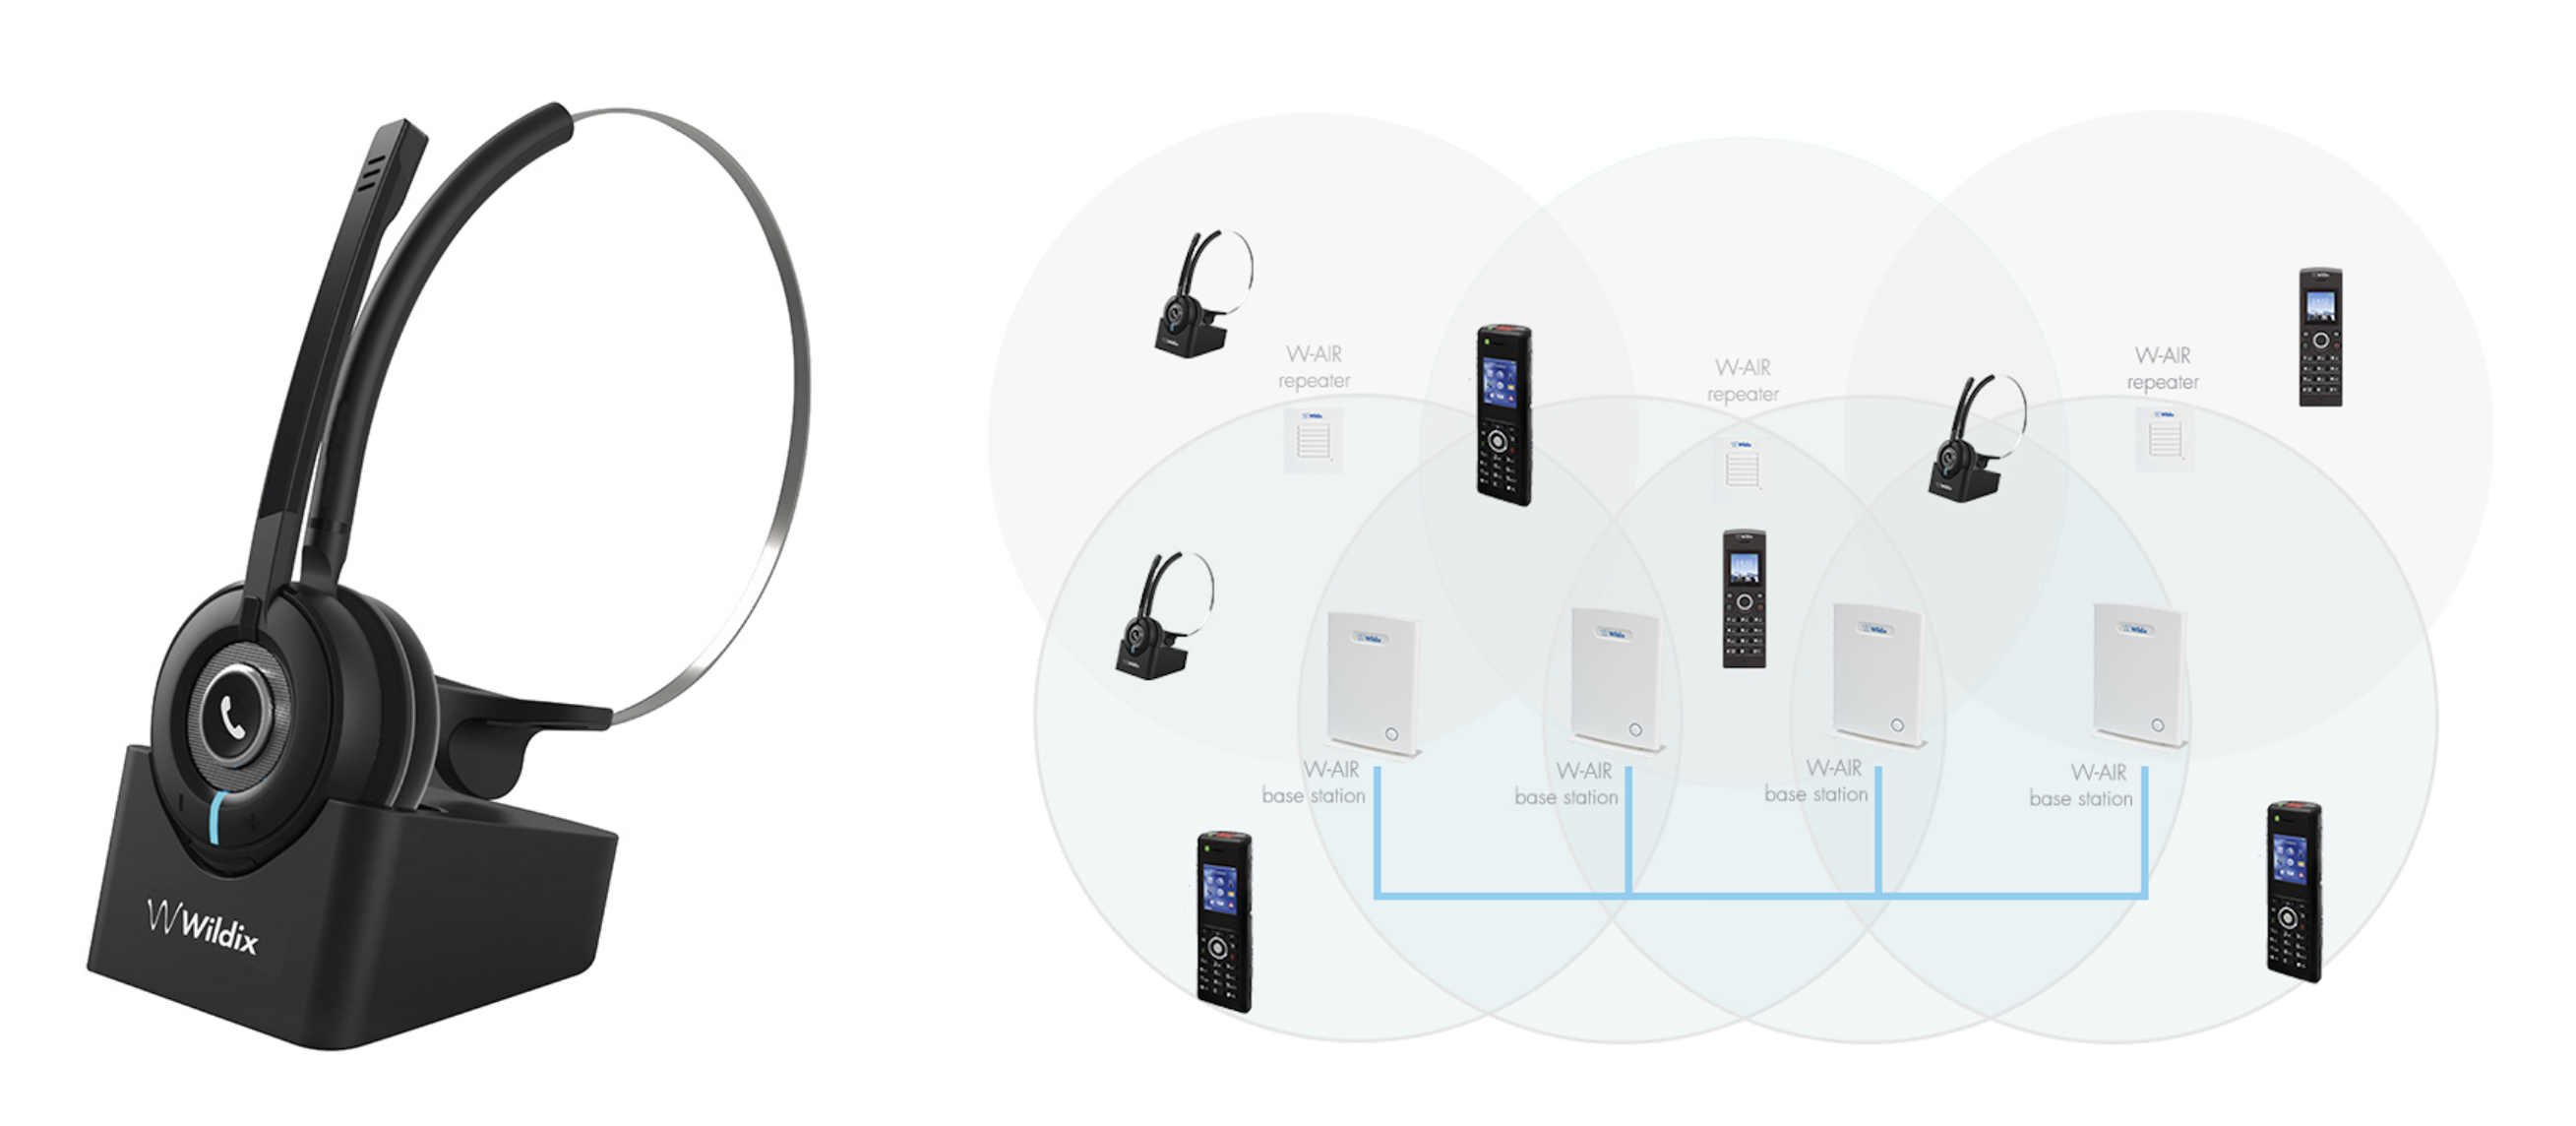 W-AIR DECT Headset and Intelligent DECT Network Configuration